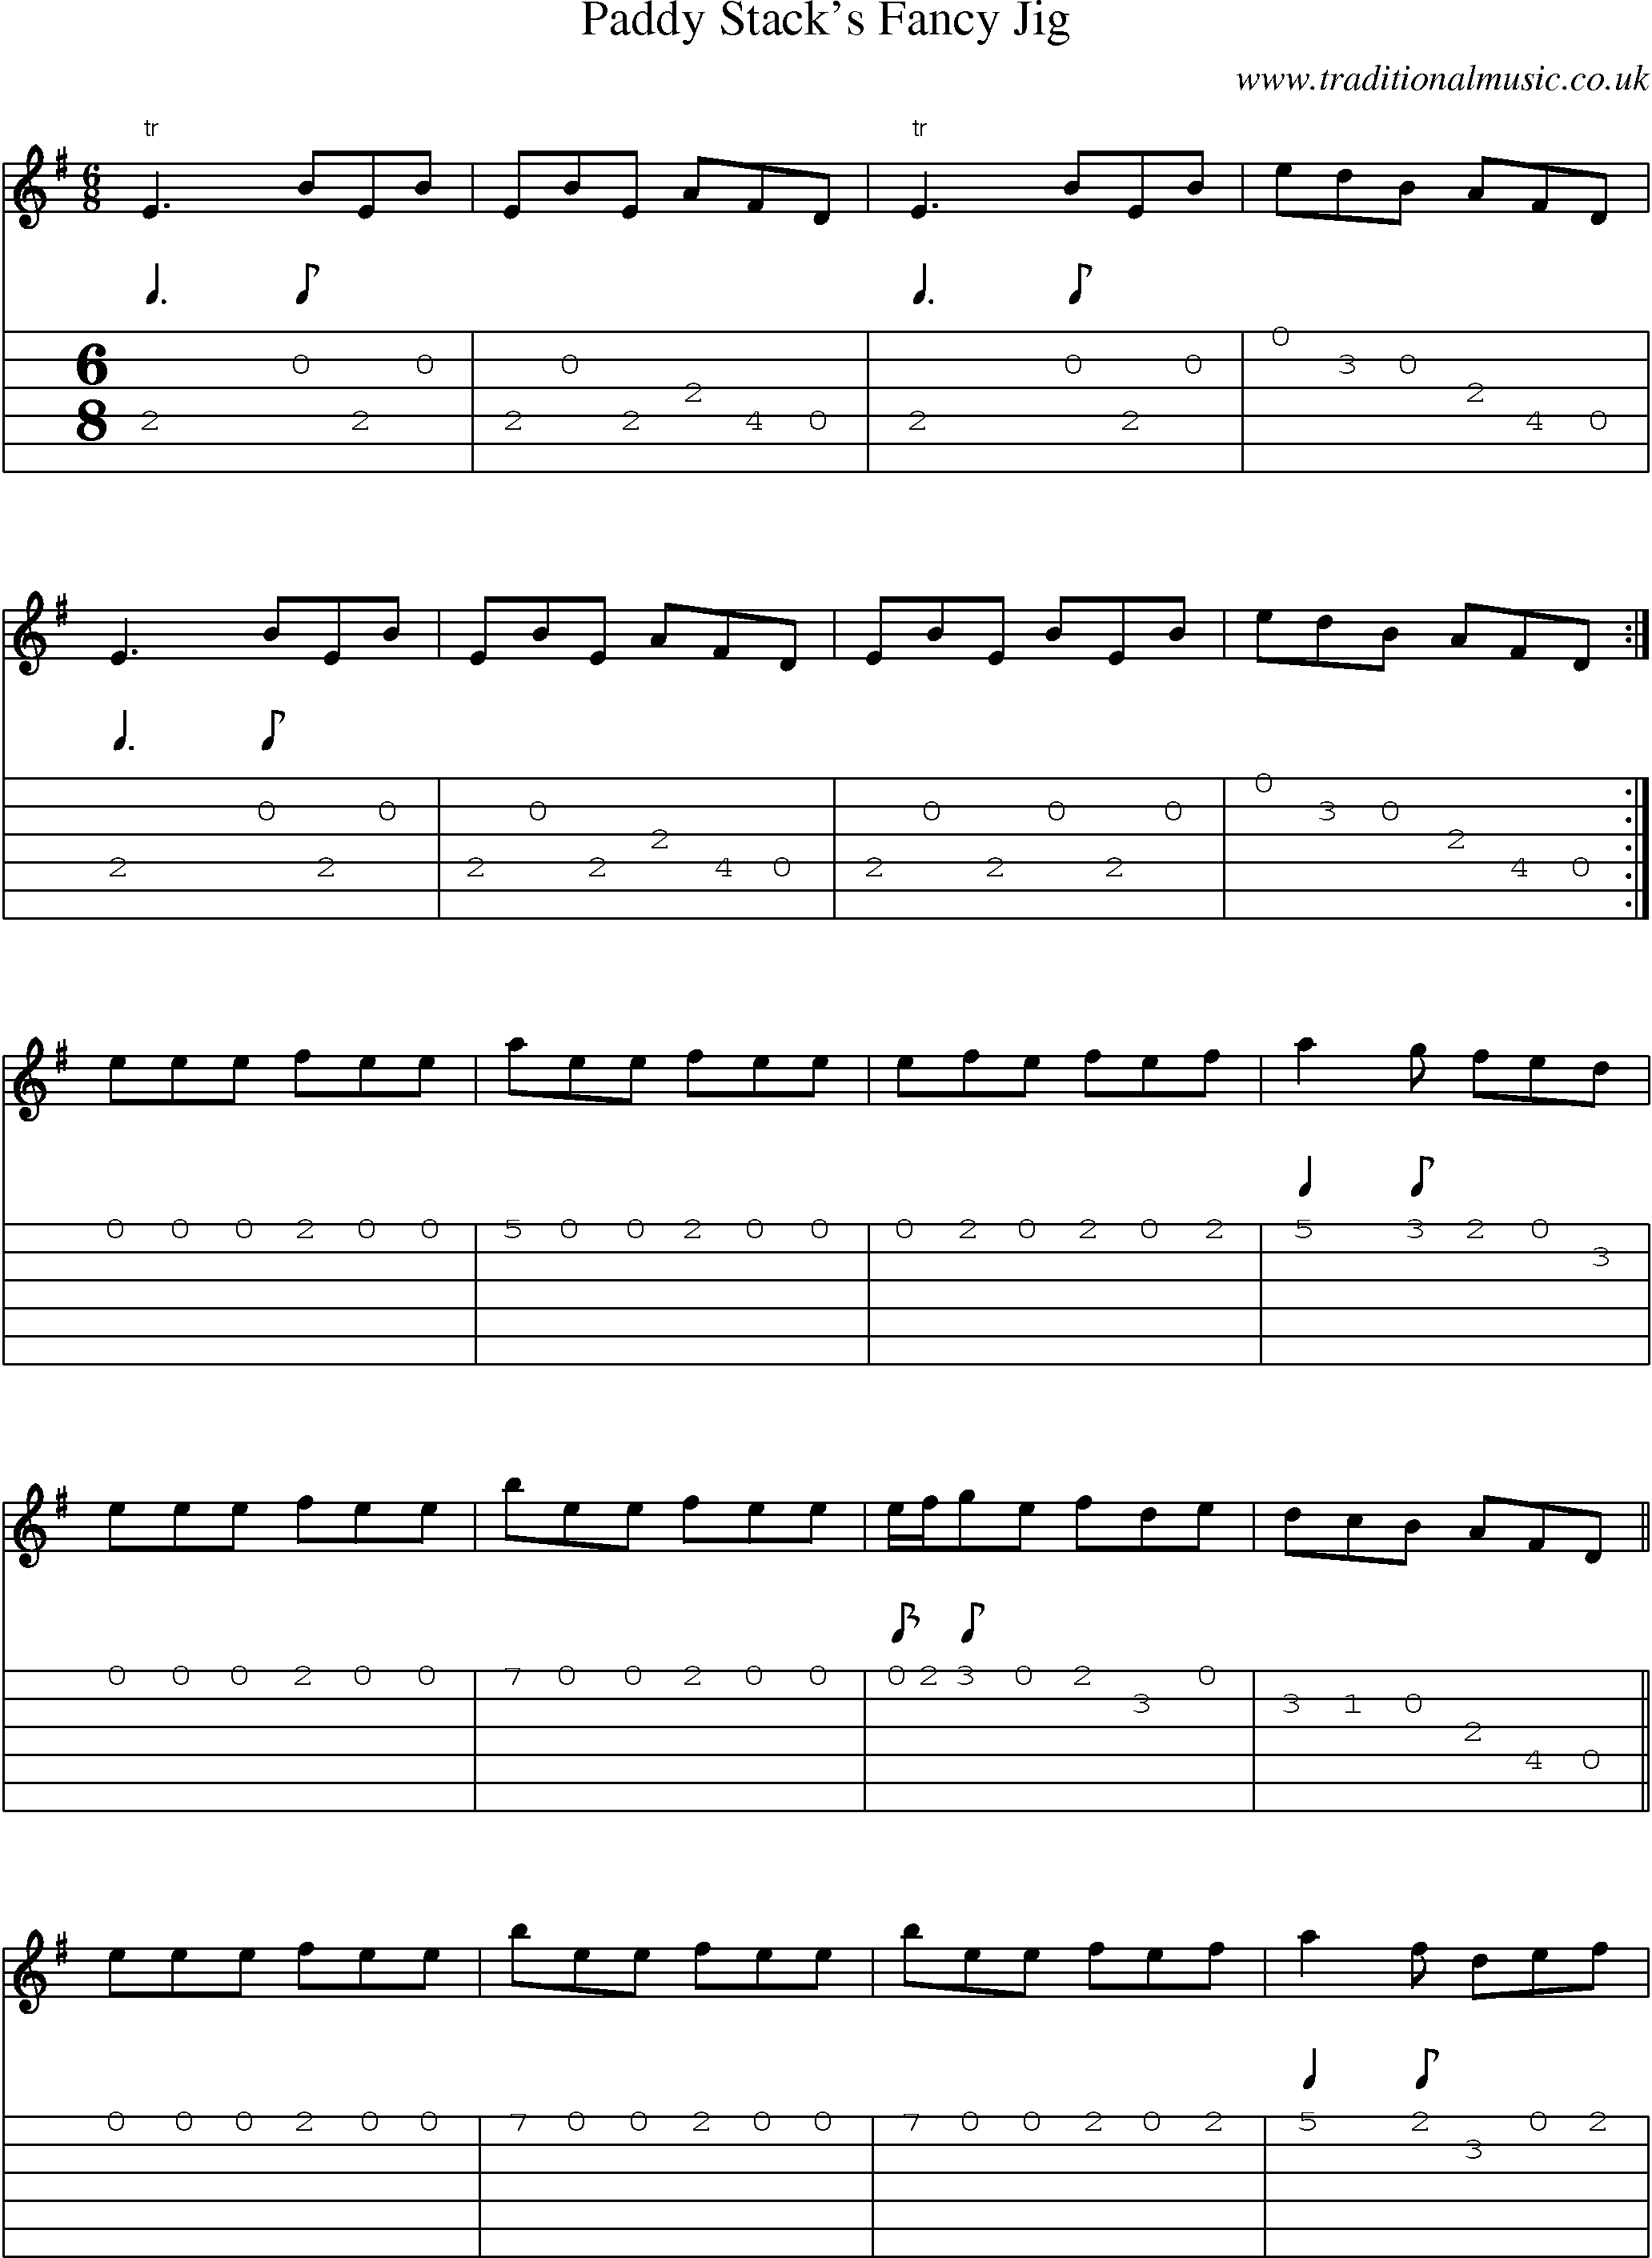 Music Score and Guitar Tabs for Paddy Stacks Fancy Jig